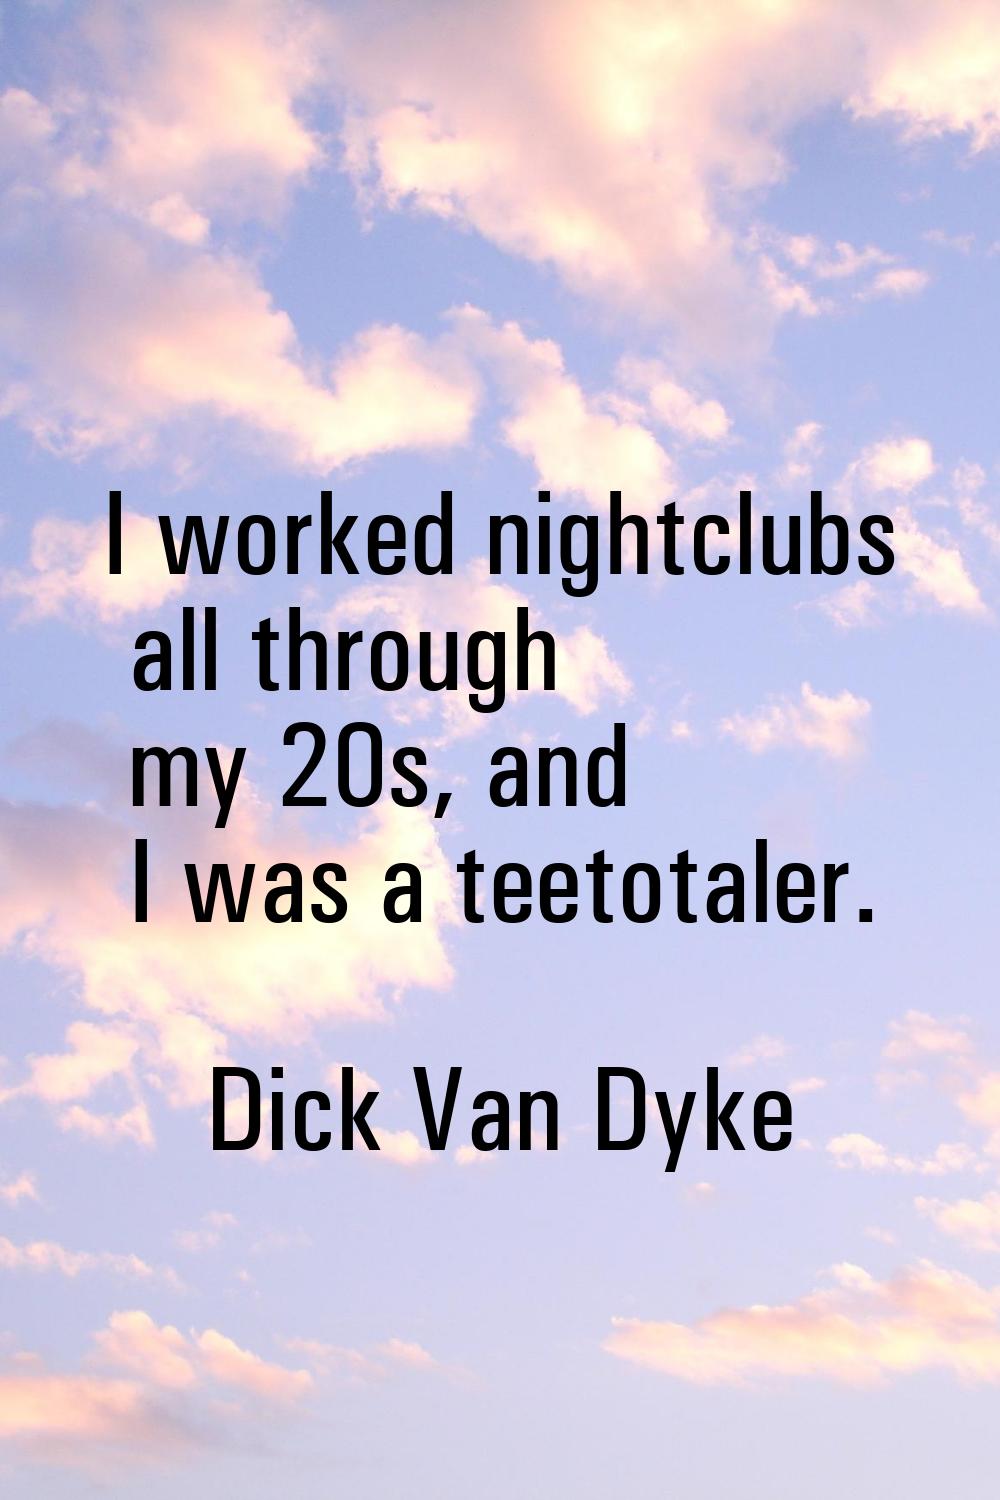 I worked nightclubs all through my 20s, and I was a teetotaler.